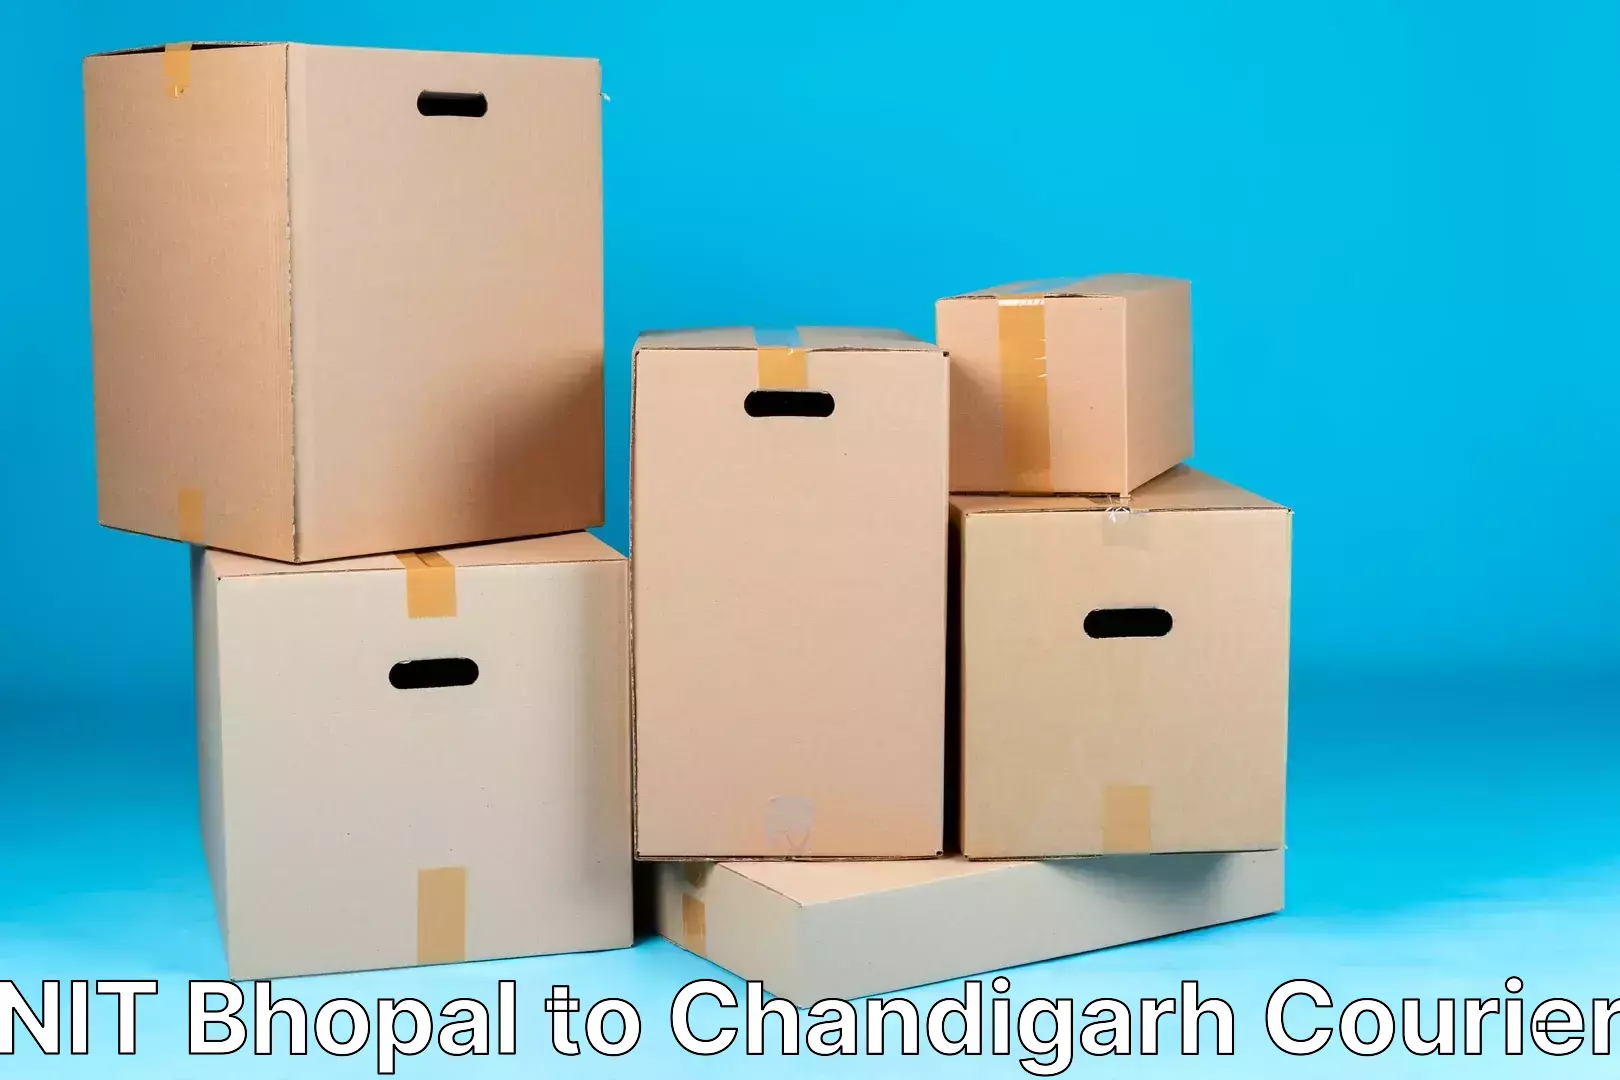 Premium courier solutions NIT Bhopal to Chandigarh